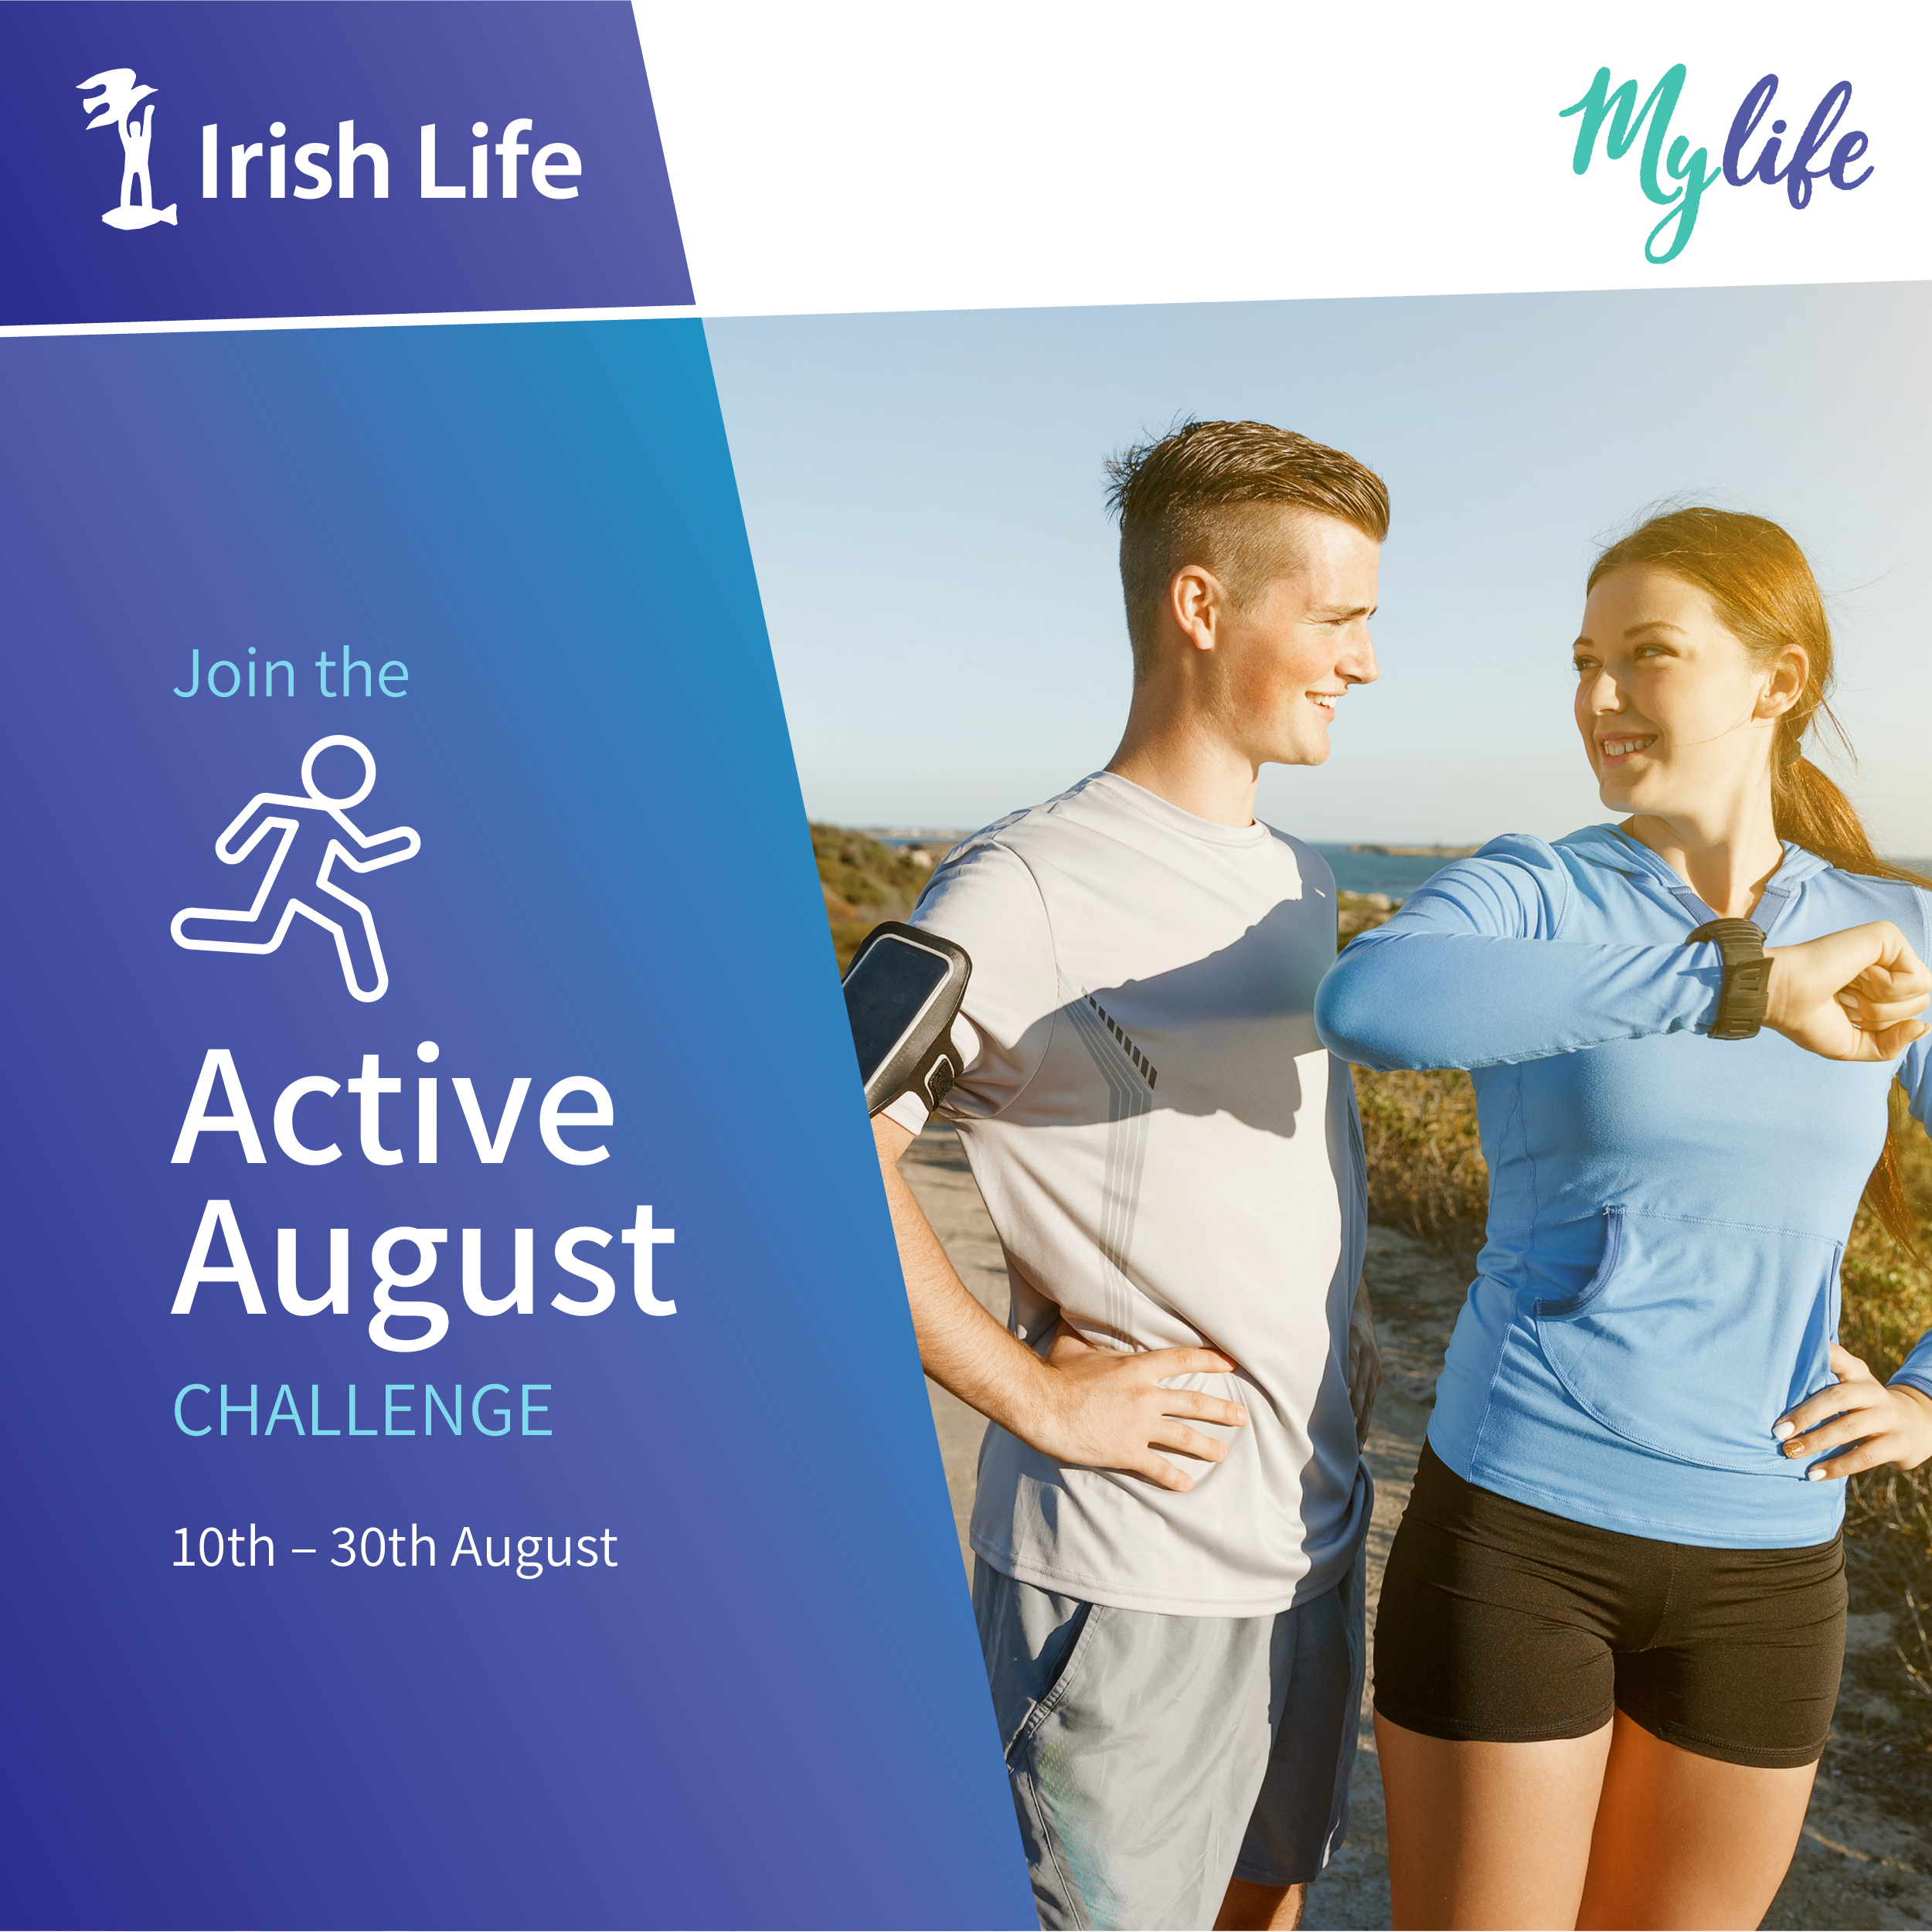 MyLife's Active August Challenge is now closed